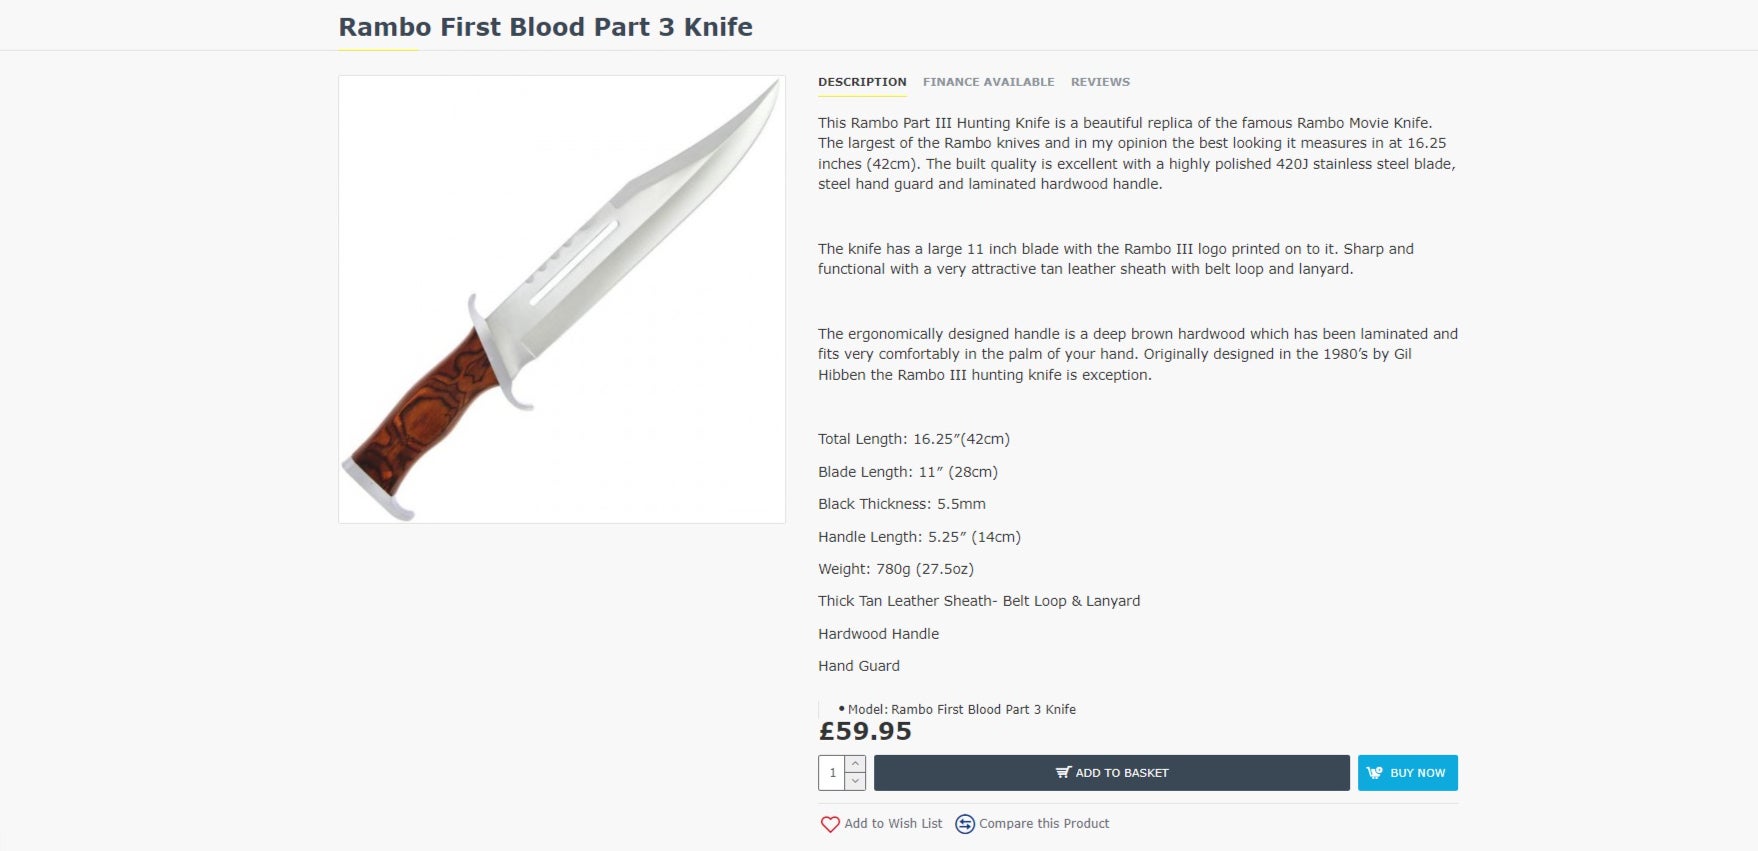 The Rambo First Blood Part 3 knife on sale for £59.95 on the DAI Leisure website